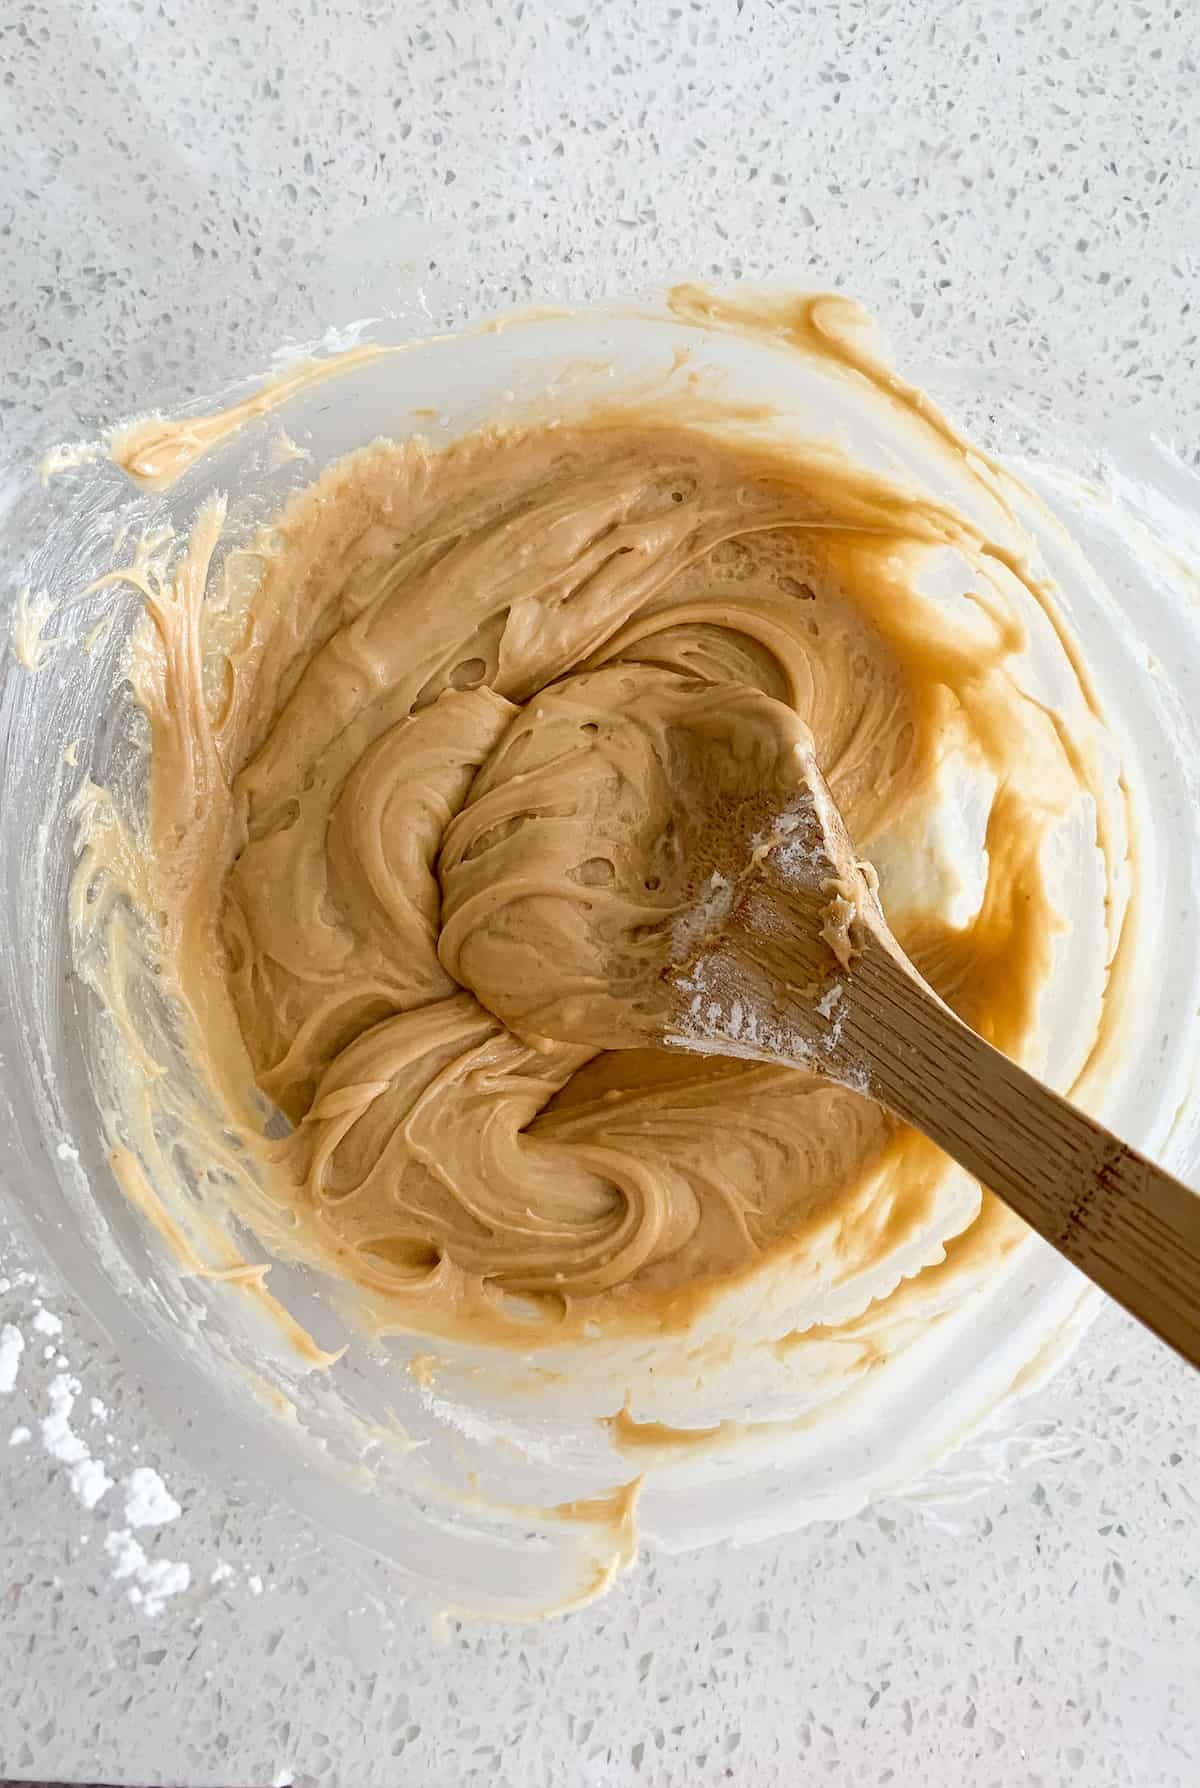 Beating Biscoff cream cheese
frosting together